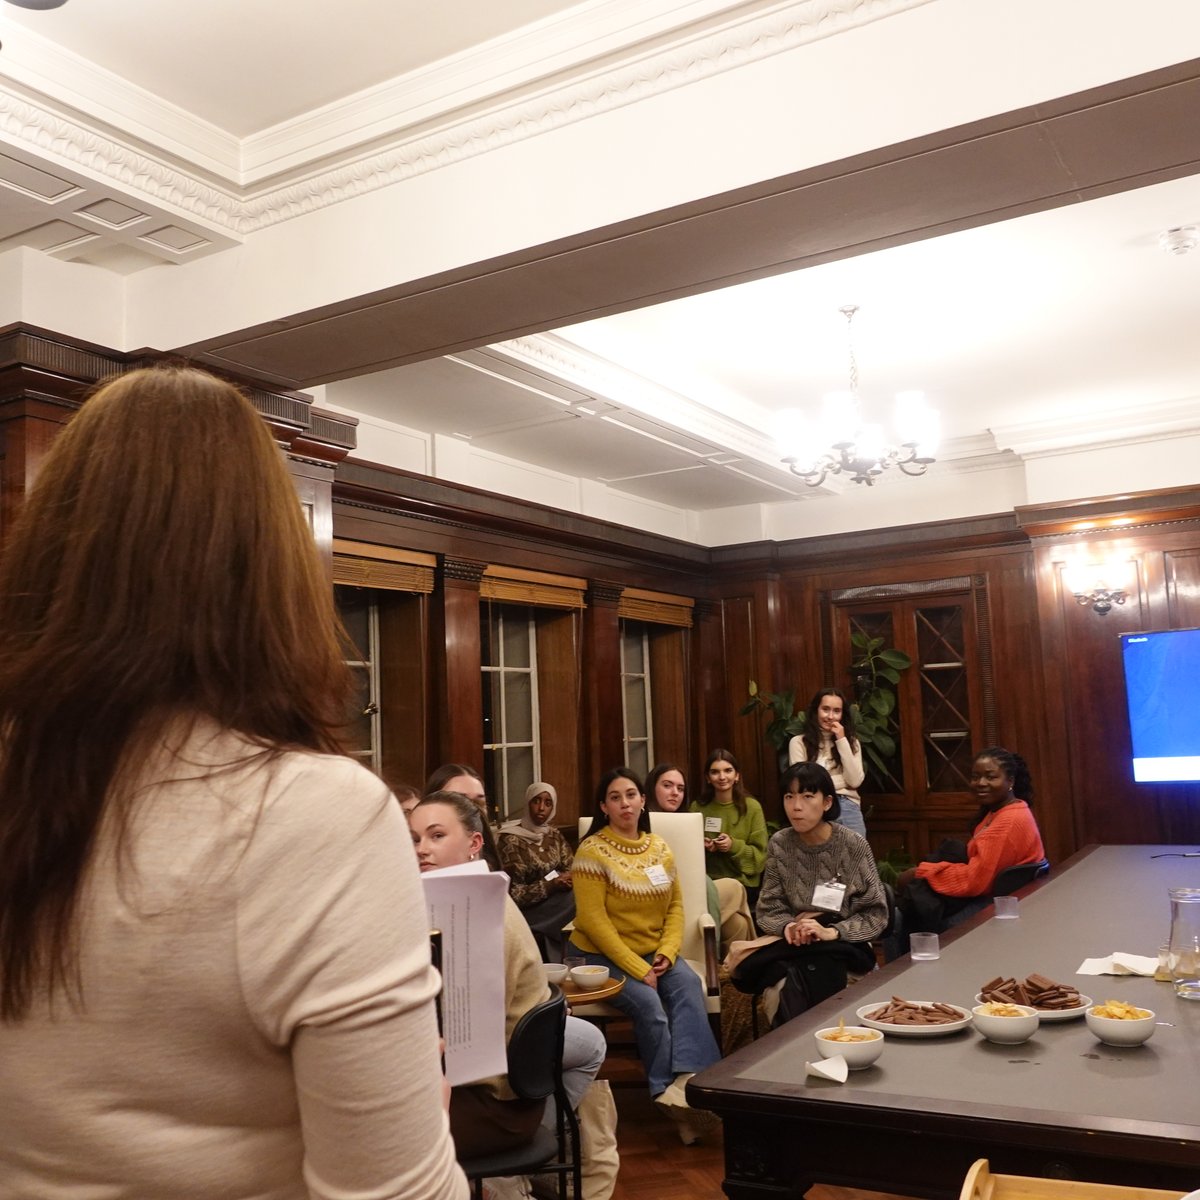 Thanks to everyone who attended our #WorkInPublishing Week speed-networking event! 

A great chance to hear your questions and chat all things books. Follow our Inside_BBUK Instagram channel as we set about answering some of the most common questions raised in the weeks to come.